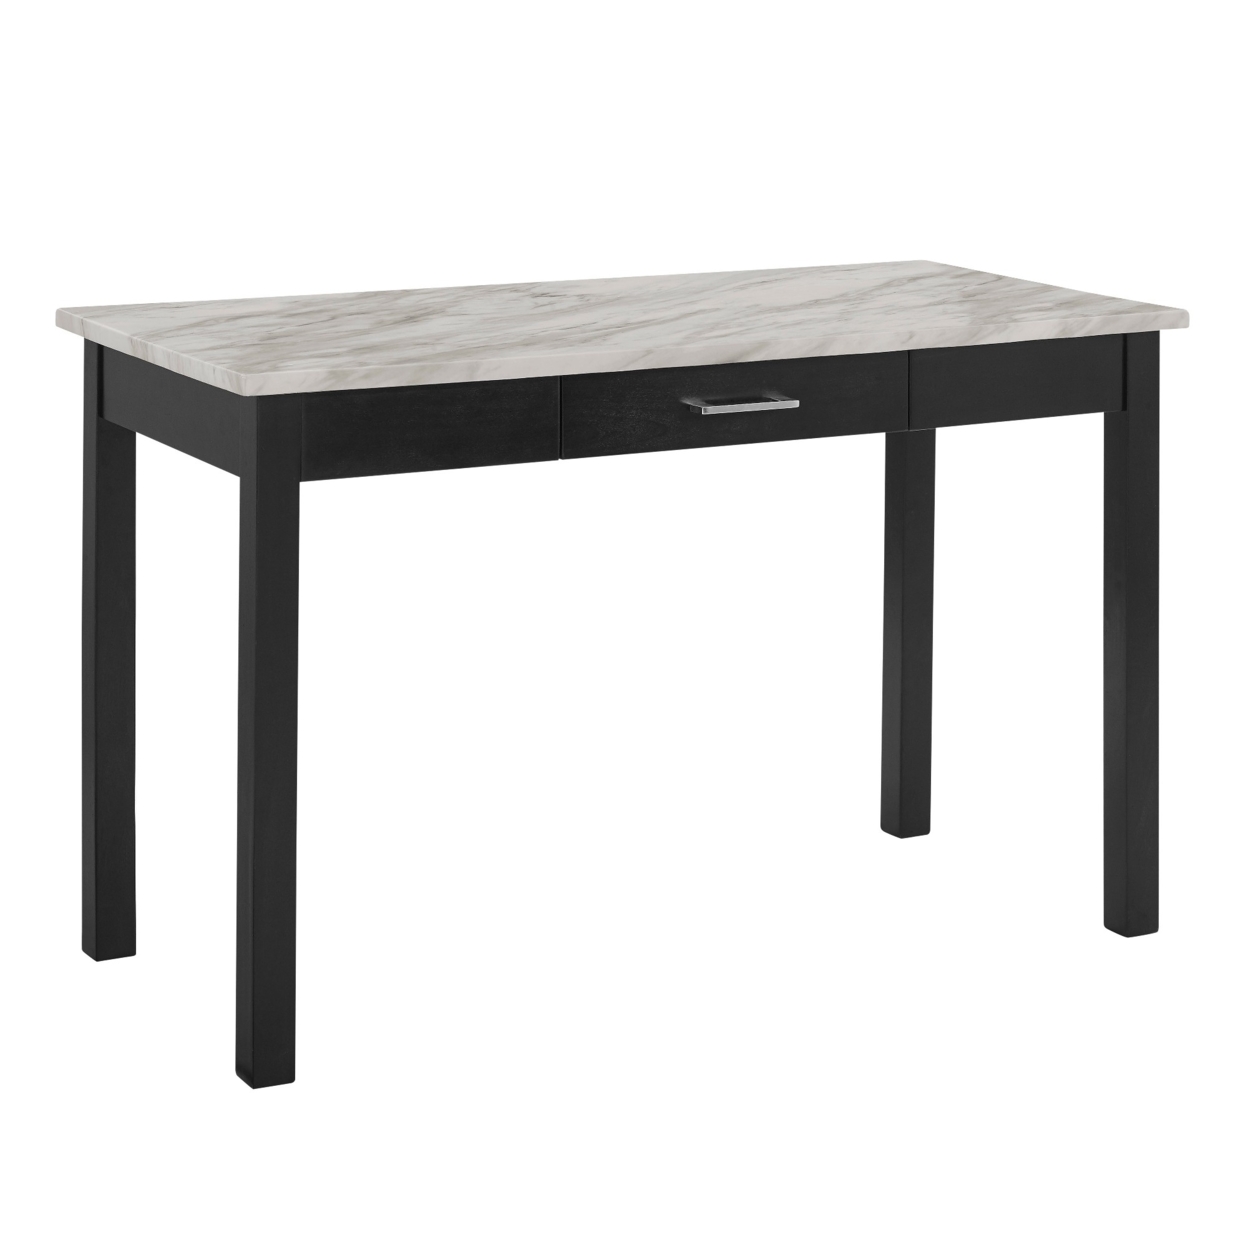 Jay 48 Inch Desk With Drawer And Faux Marble Top, Black- Saltoro Sherpi